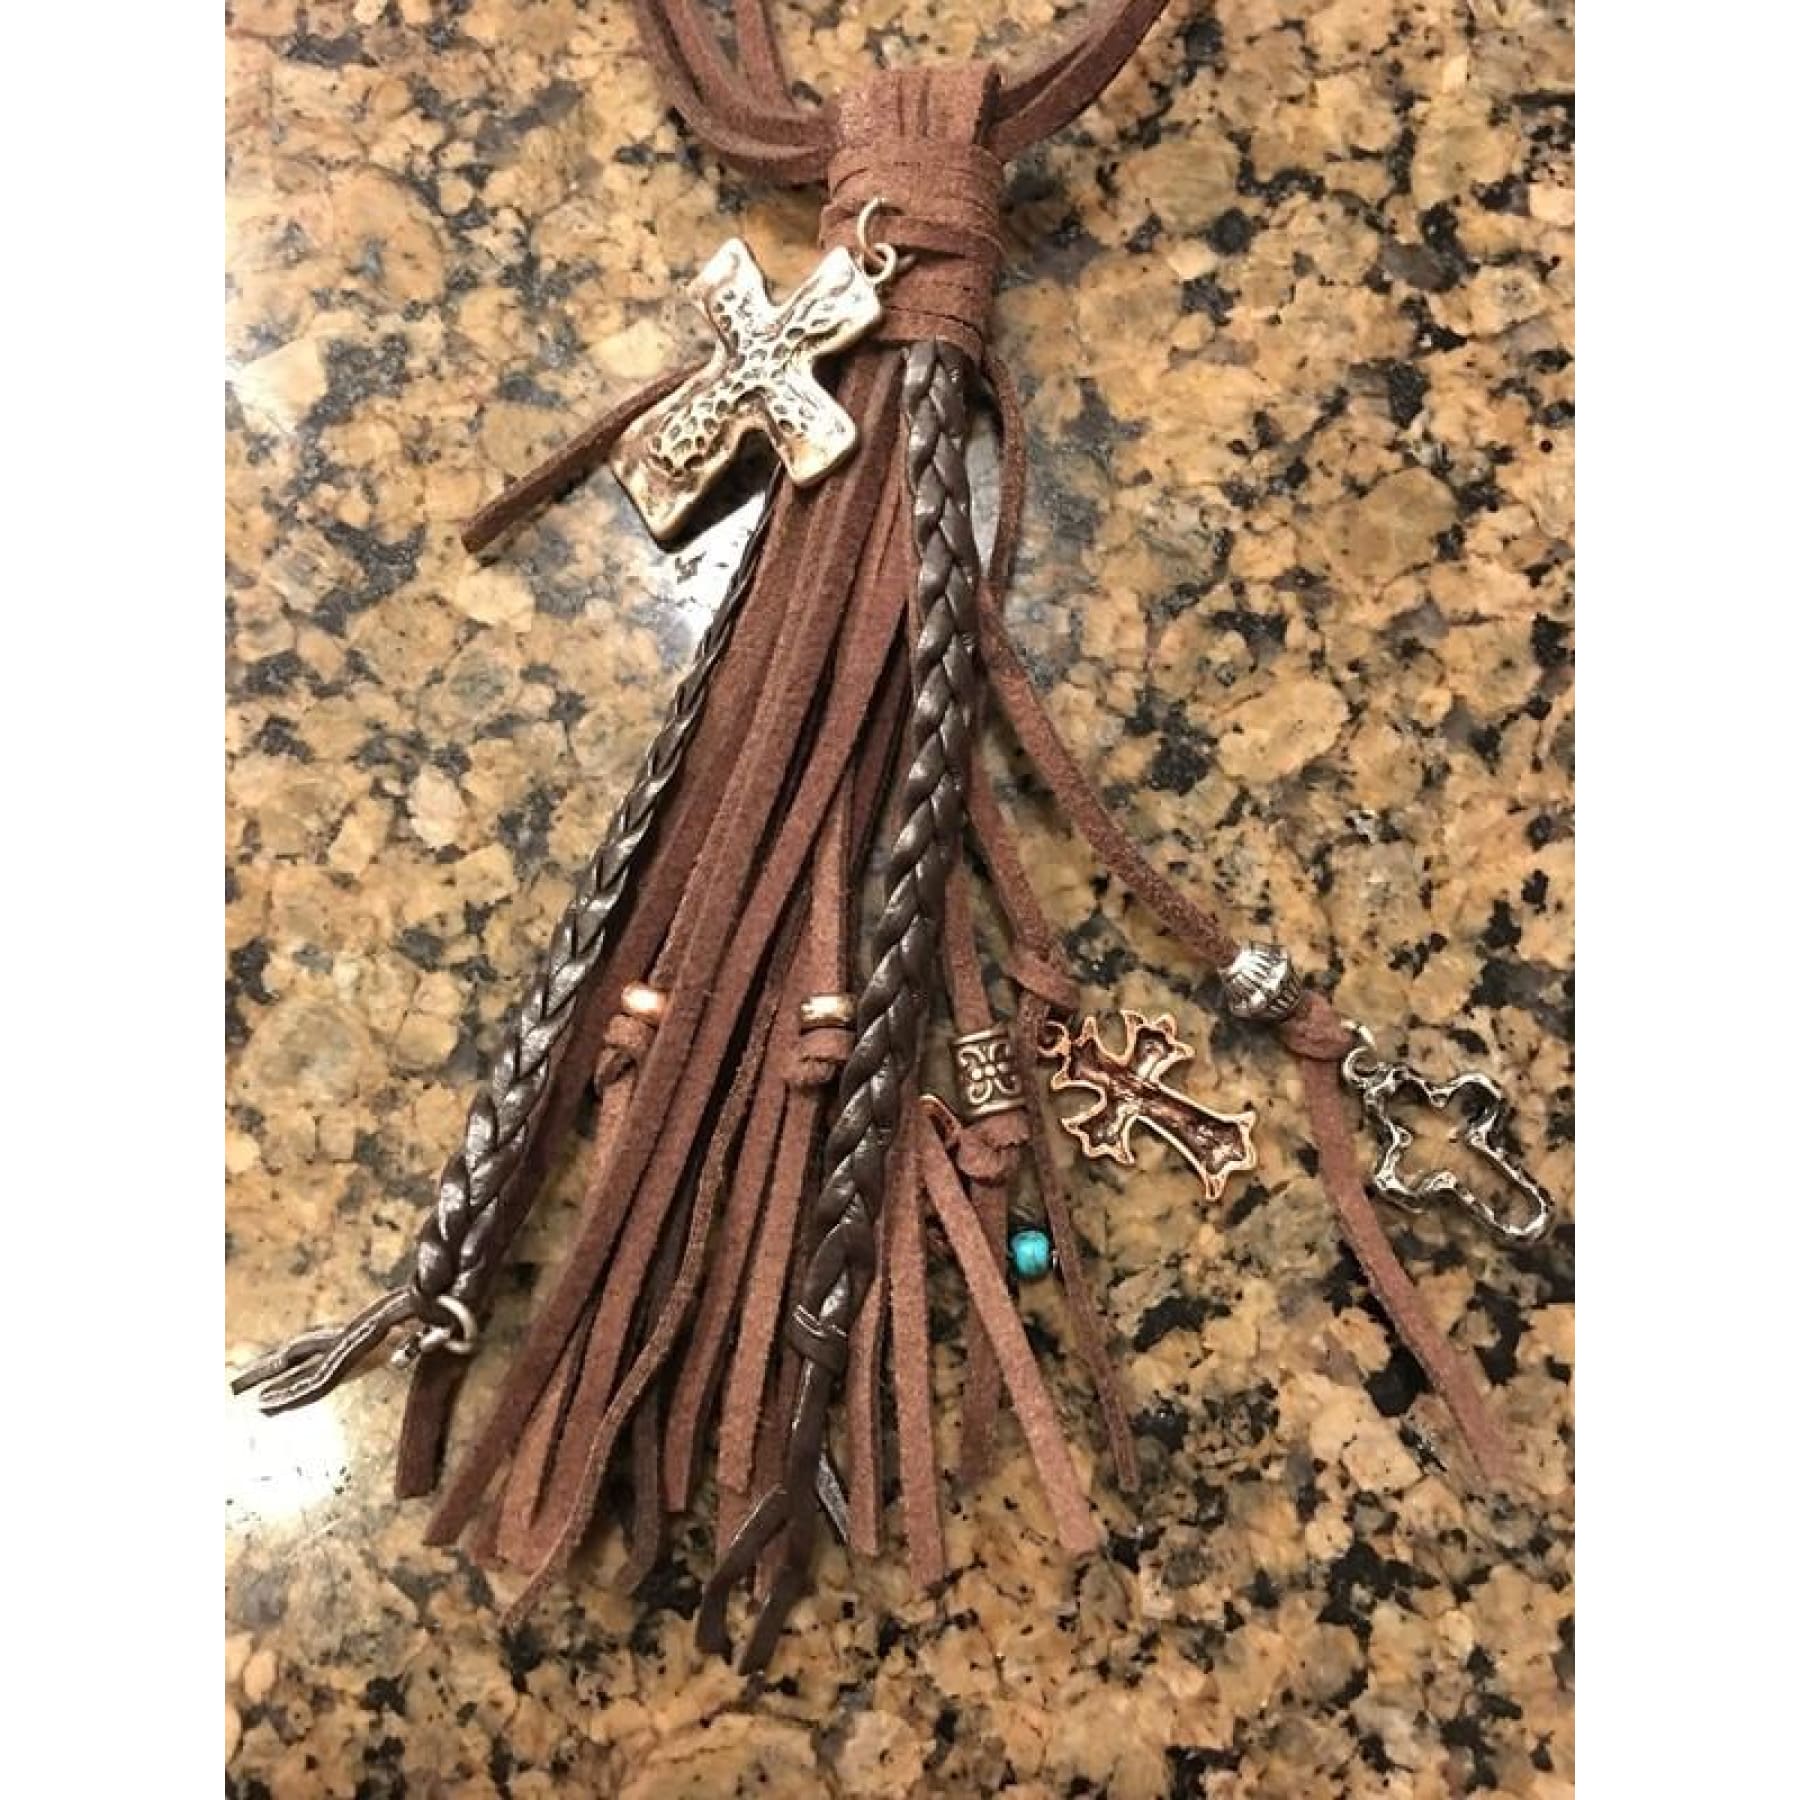 Hello Rodeo Leather Tassel Necklace With Crosses,Necklace - Dirt Road Divas Boutique